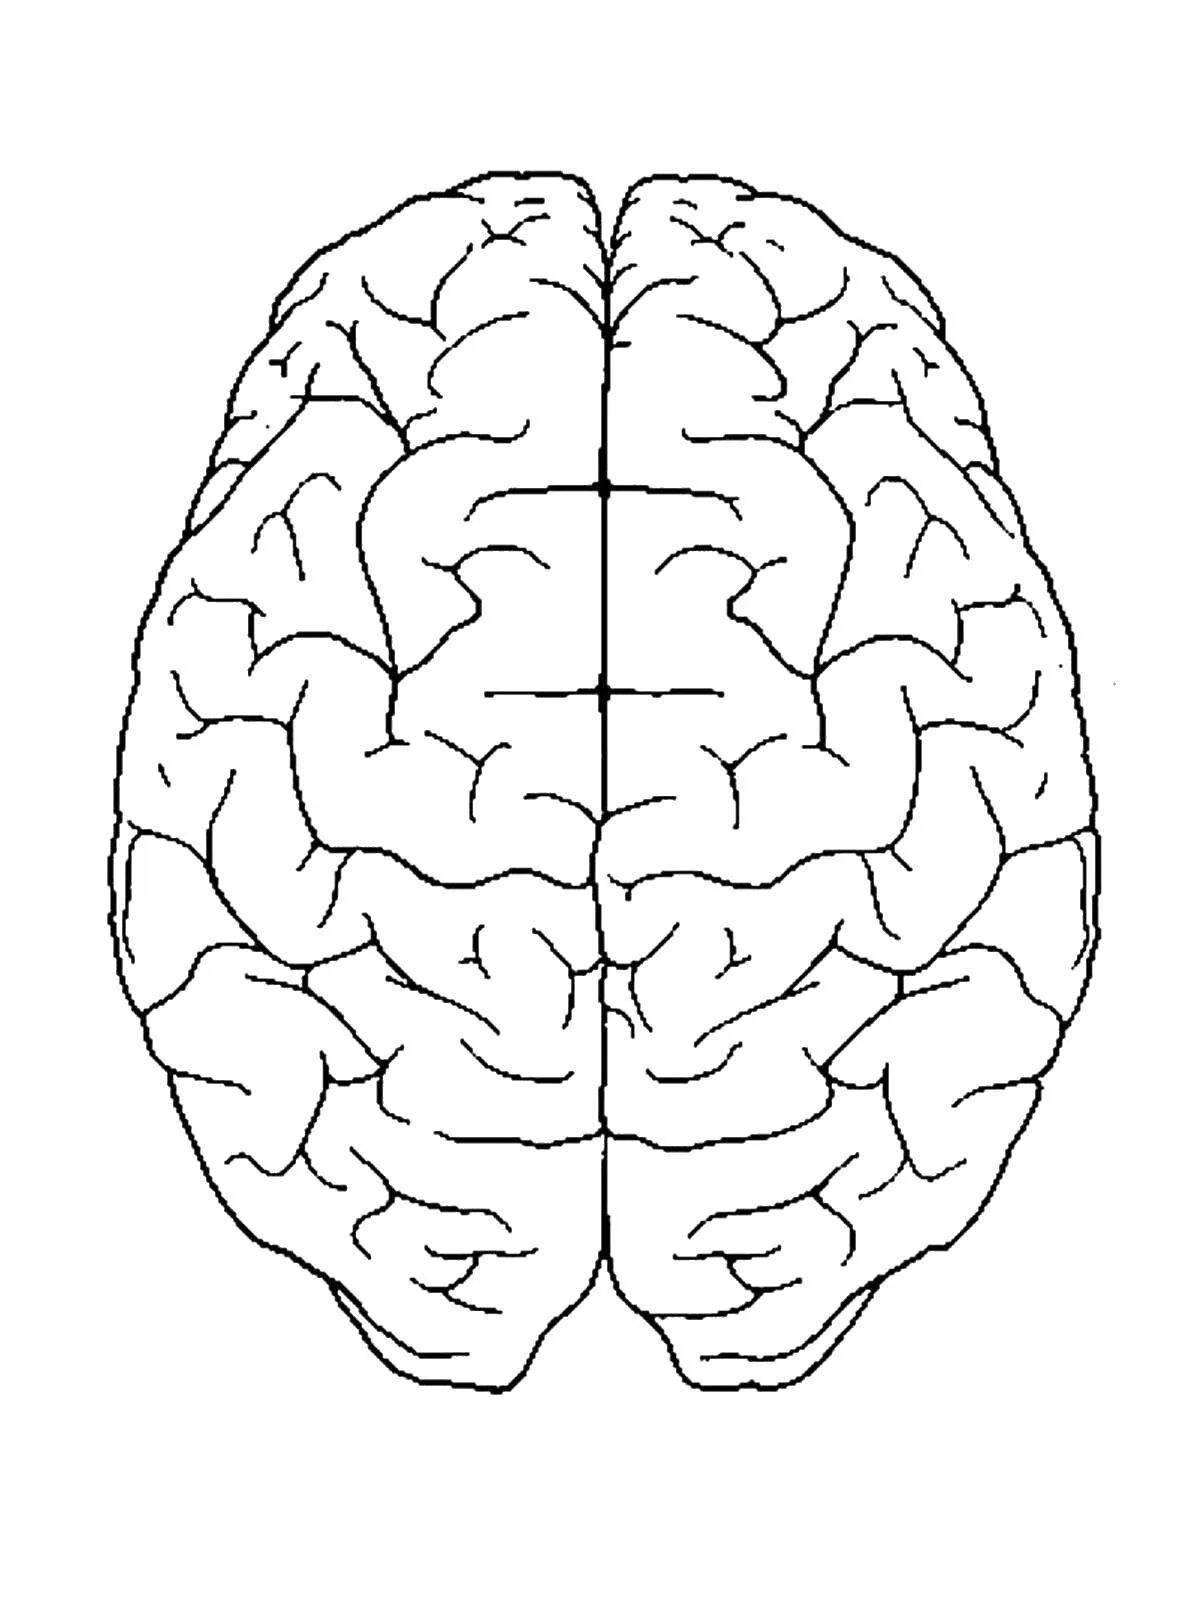 Fun coloring of the human brain for children